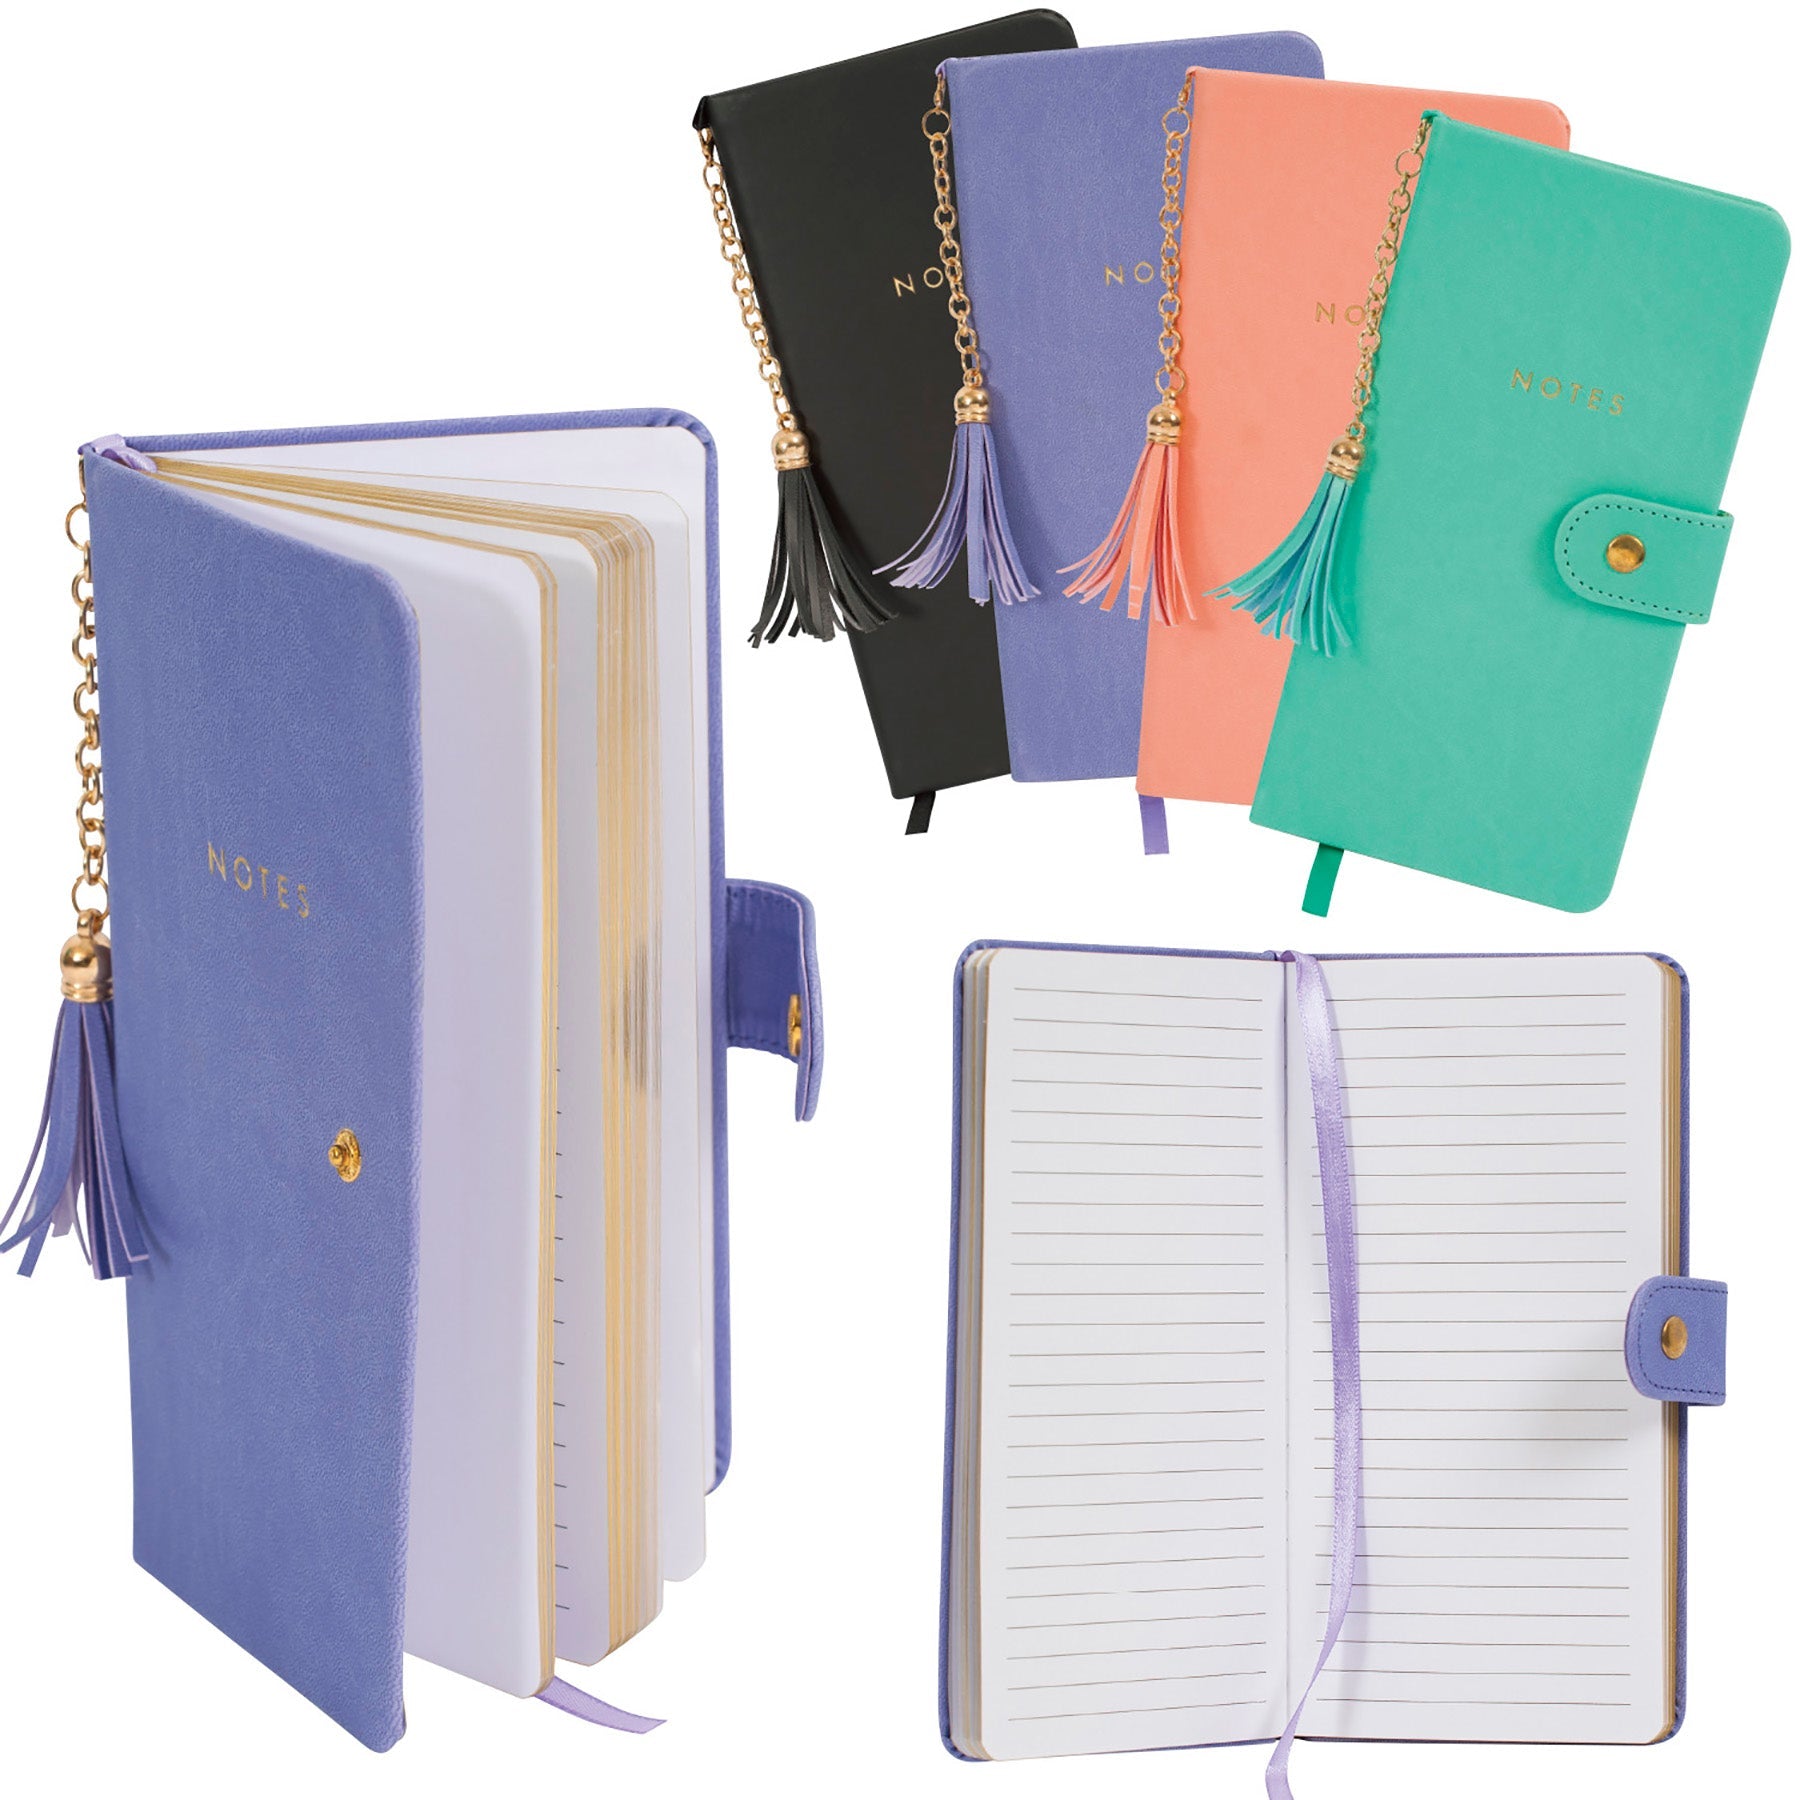 Merangue Notebook with Tassel Lined 320 pages 4x7.5in